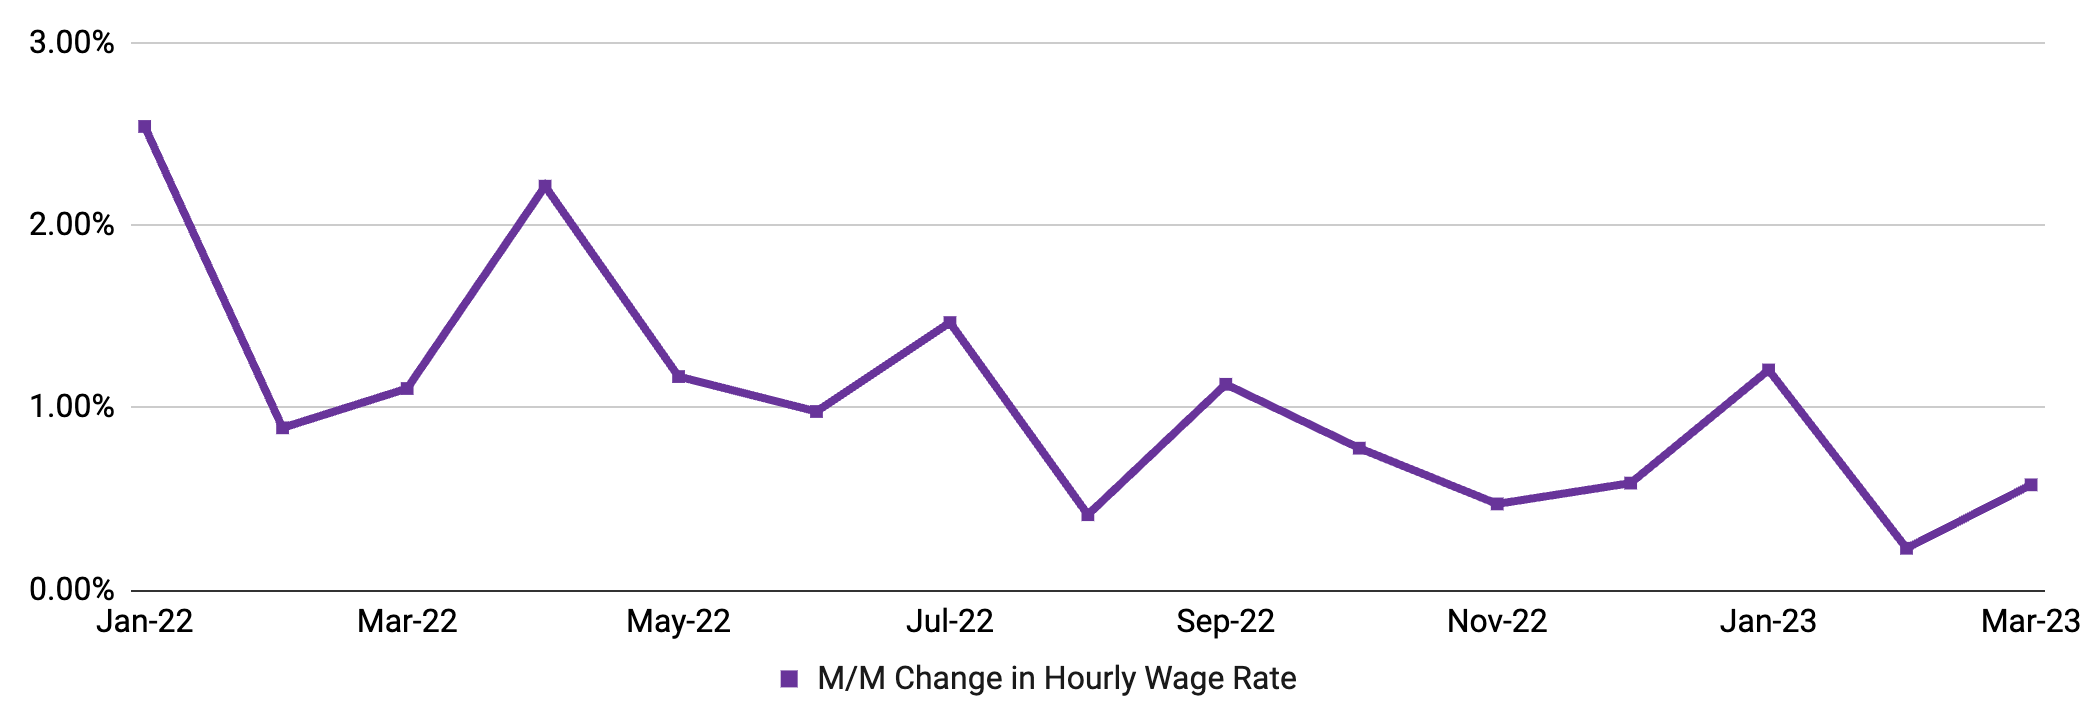 Homebase March MSHR - Wage Inflation